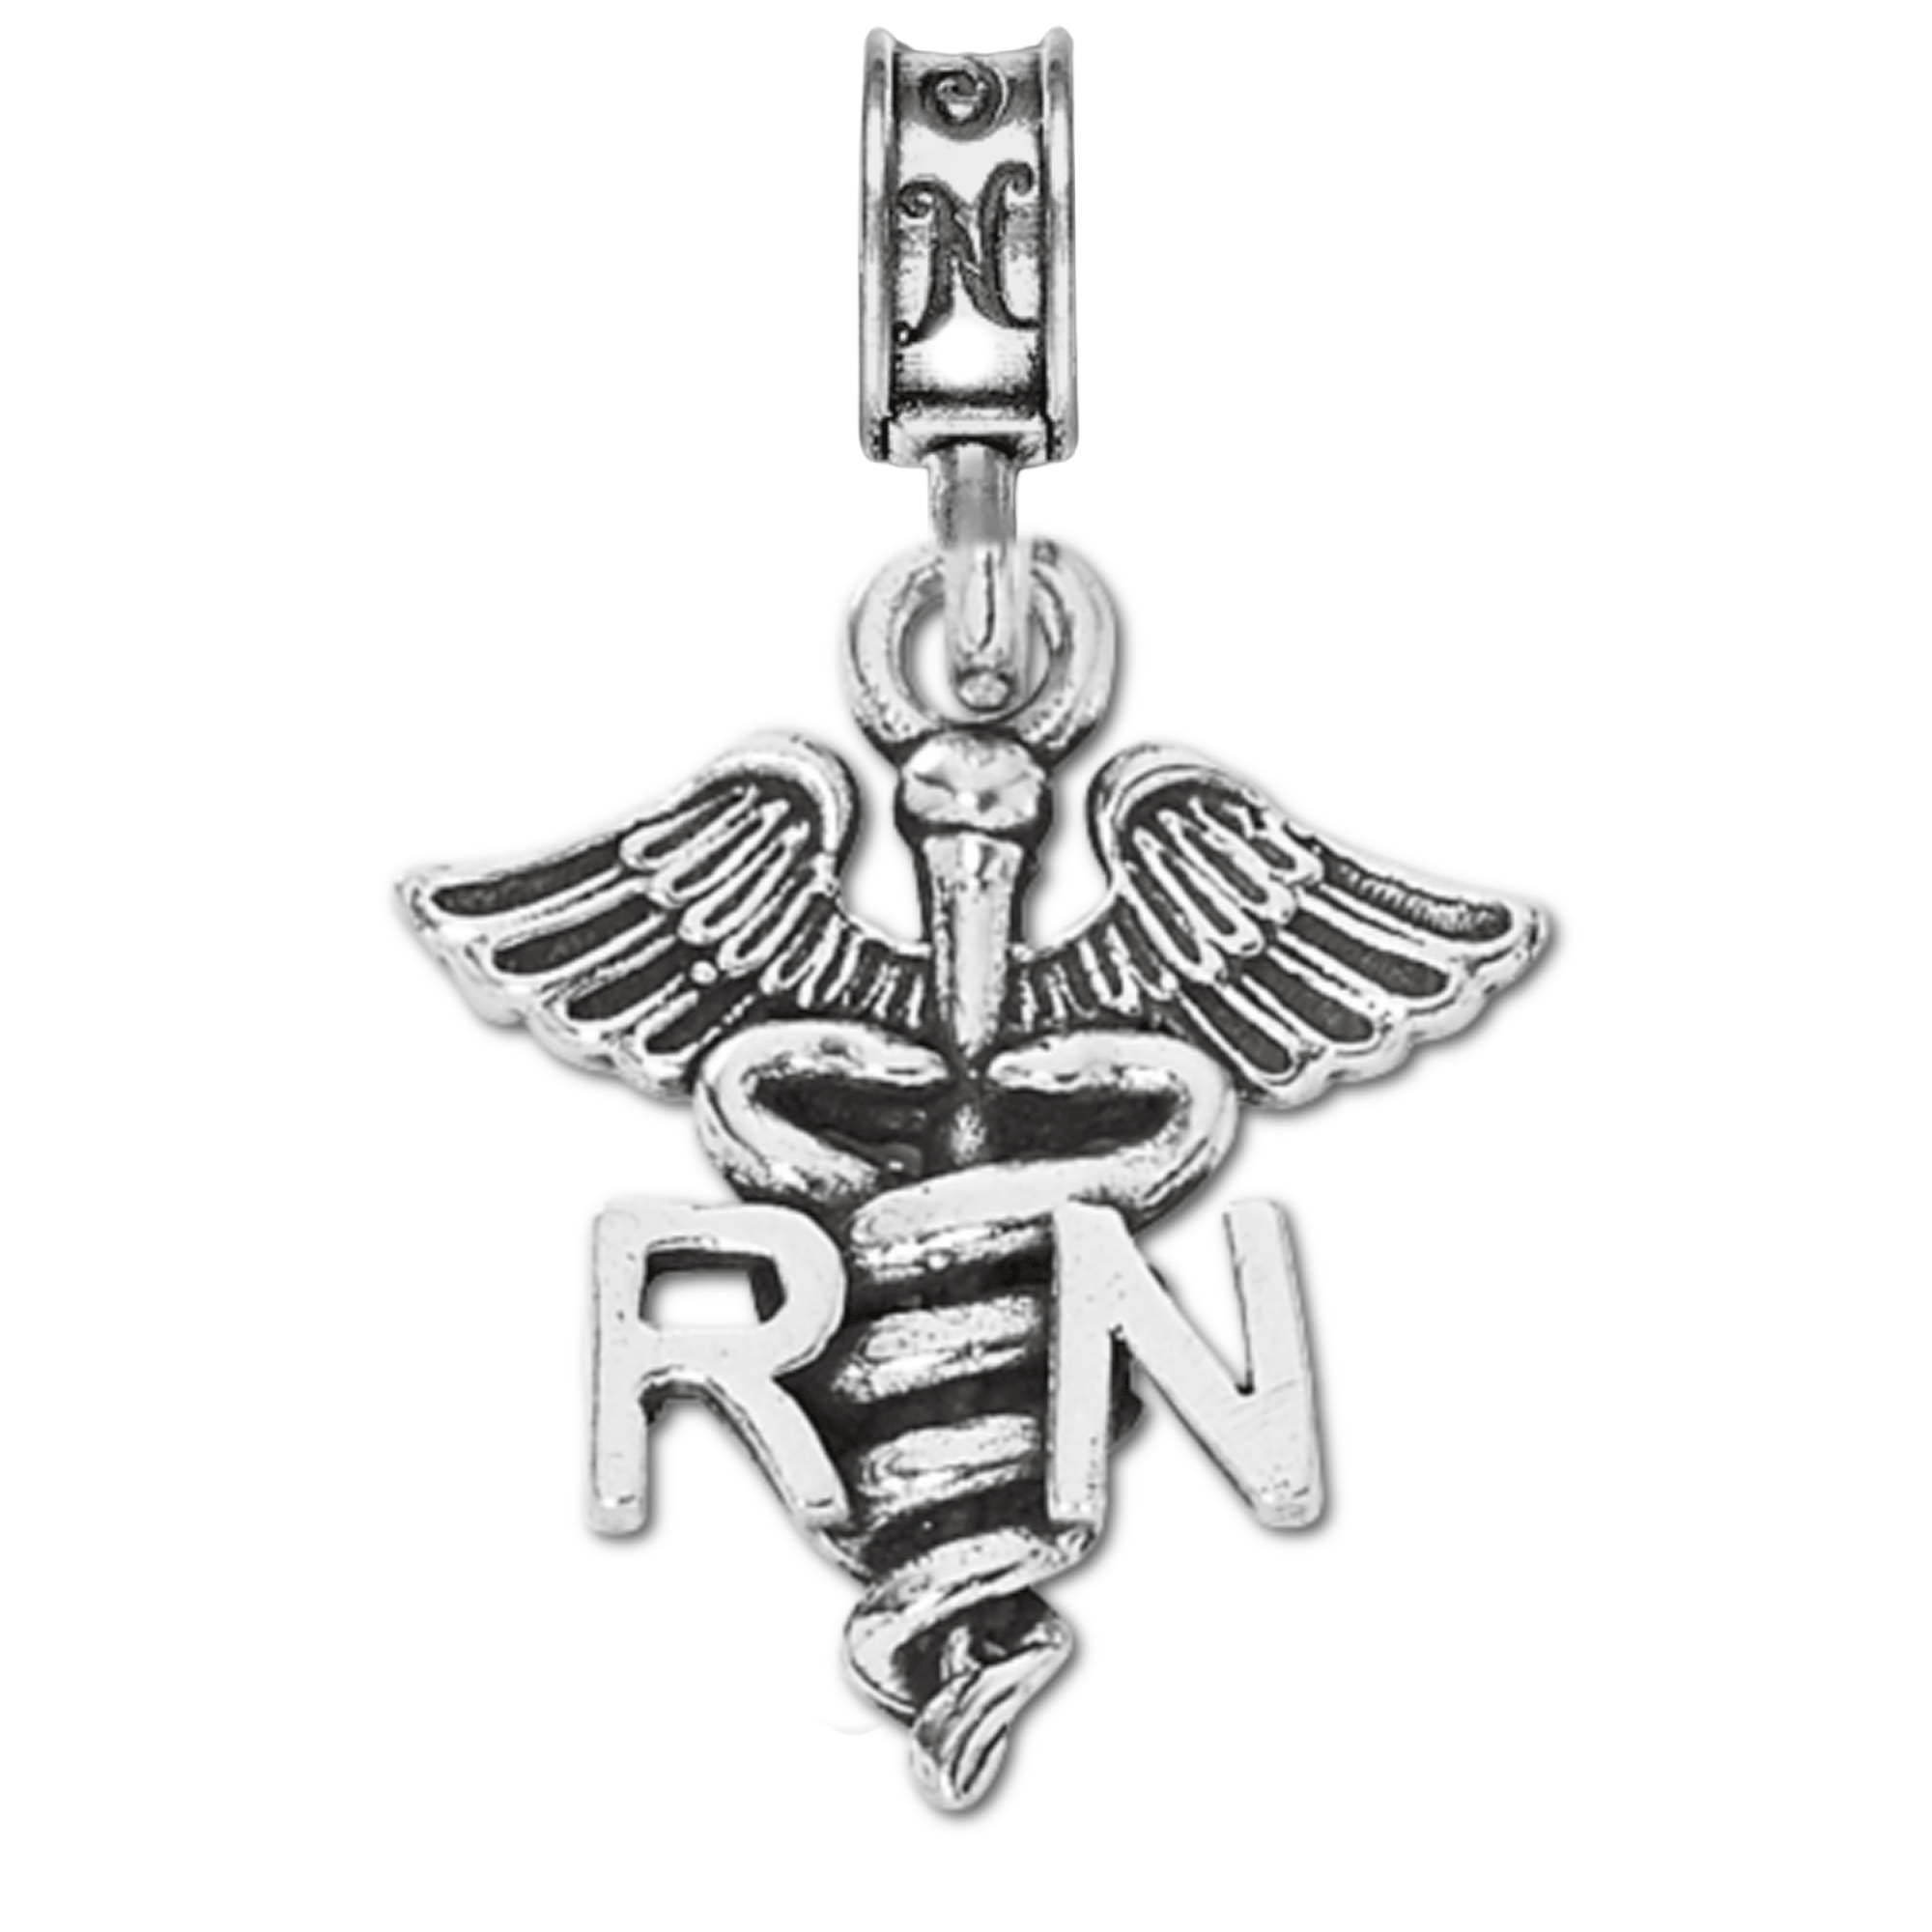 Military Jewelry, Military Charms, Military Gifts, Registered Nurse Charm, RN Charm